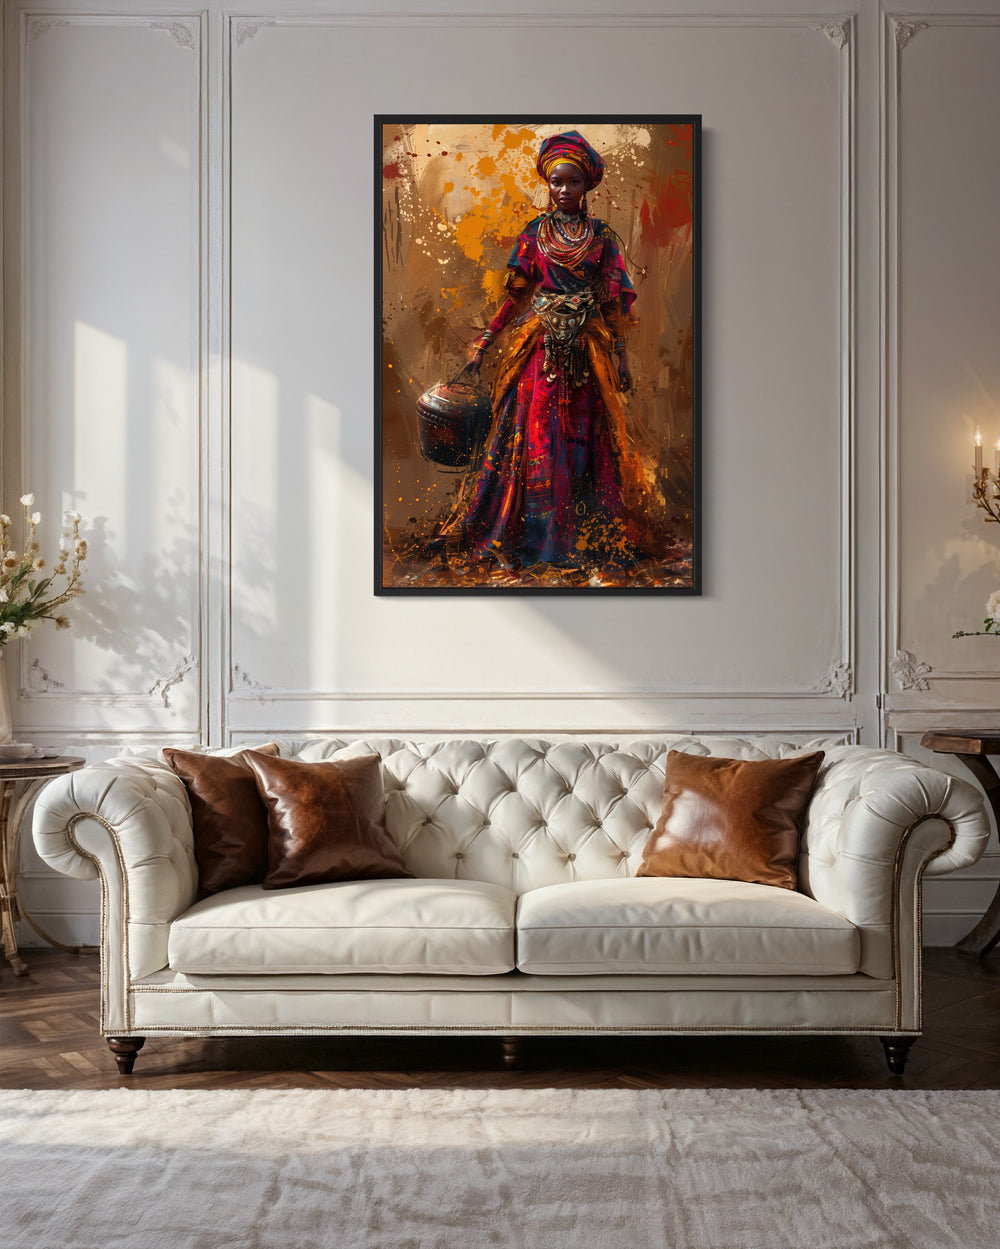 Beautiful African Woman In Traditional Clothes and Bucket Wall Art in living room